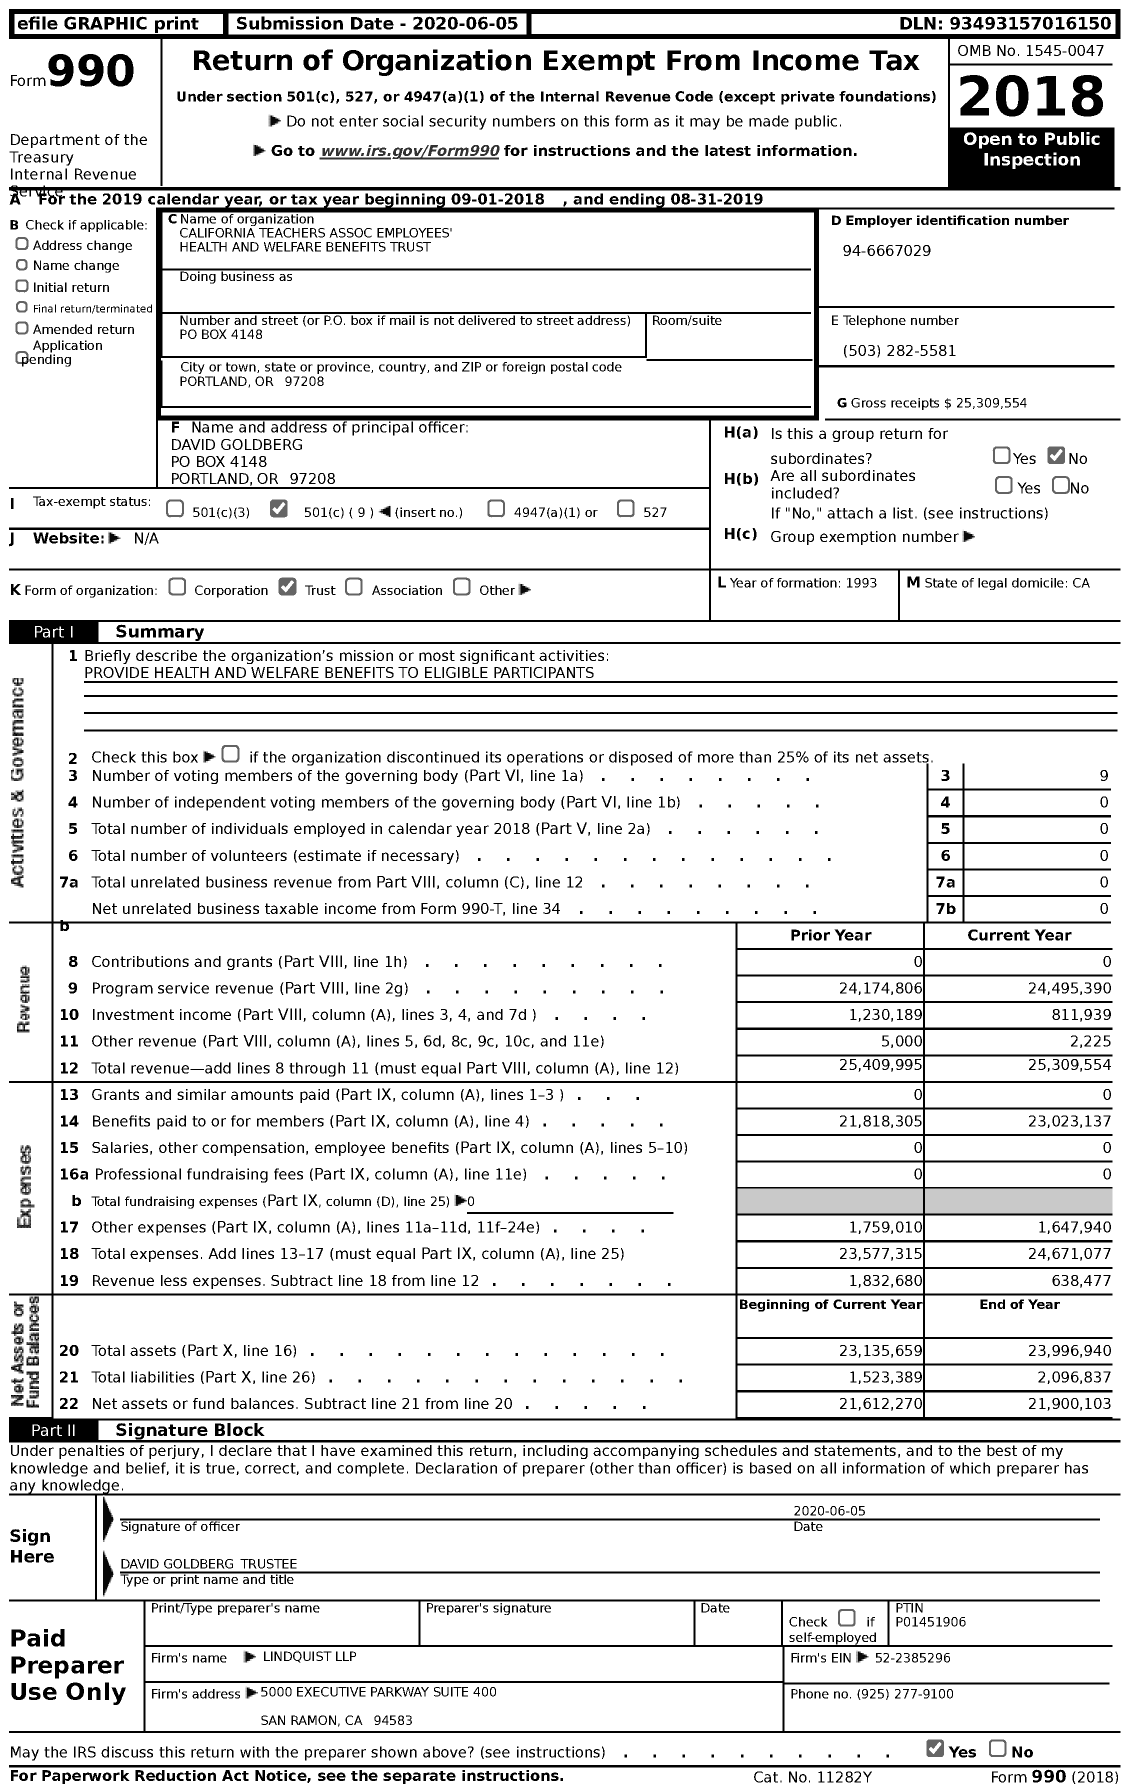 Image of first page of 2018 Form 990 for California Teachers Association Employees' Health and Welfare Benefits Trust